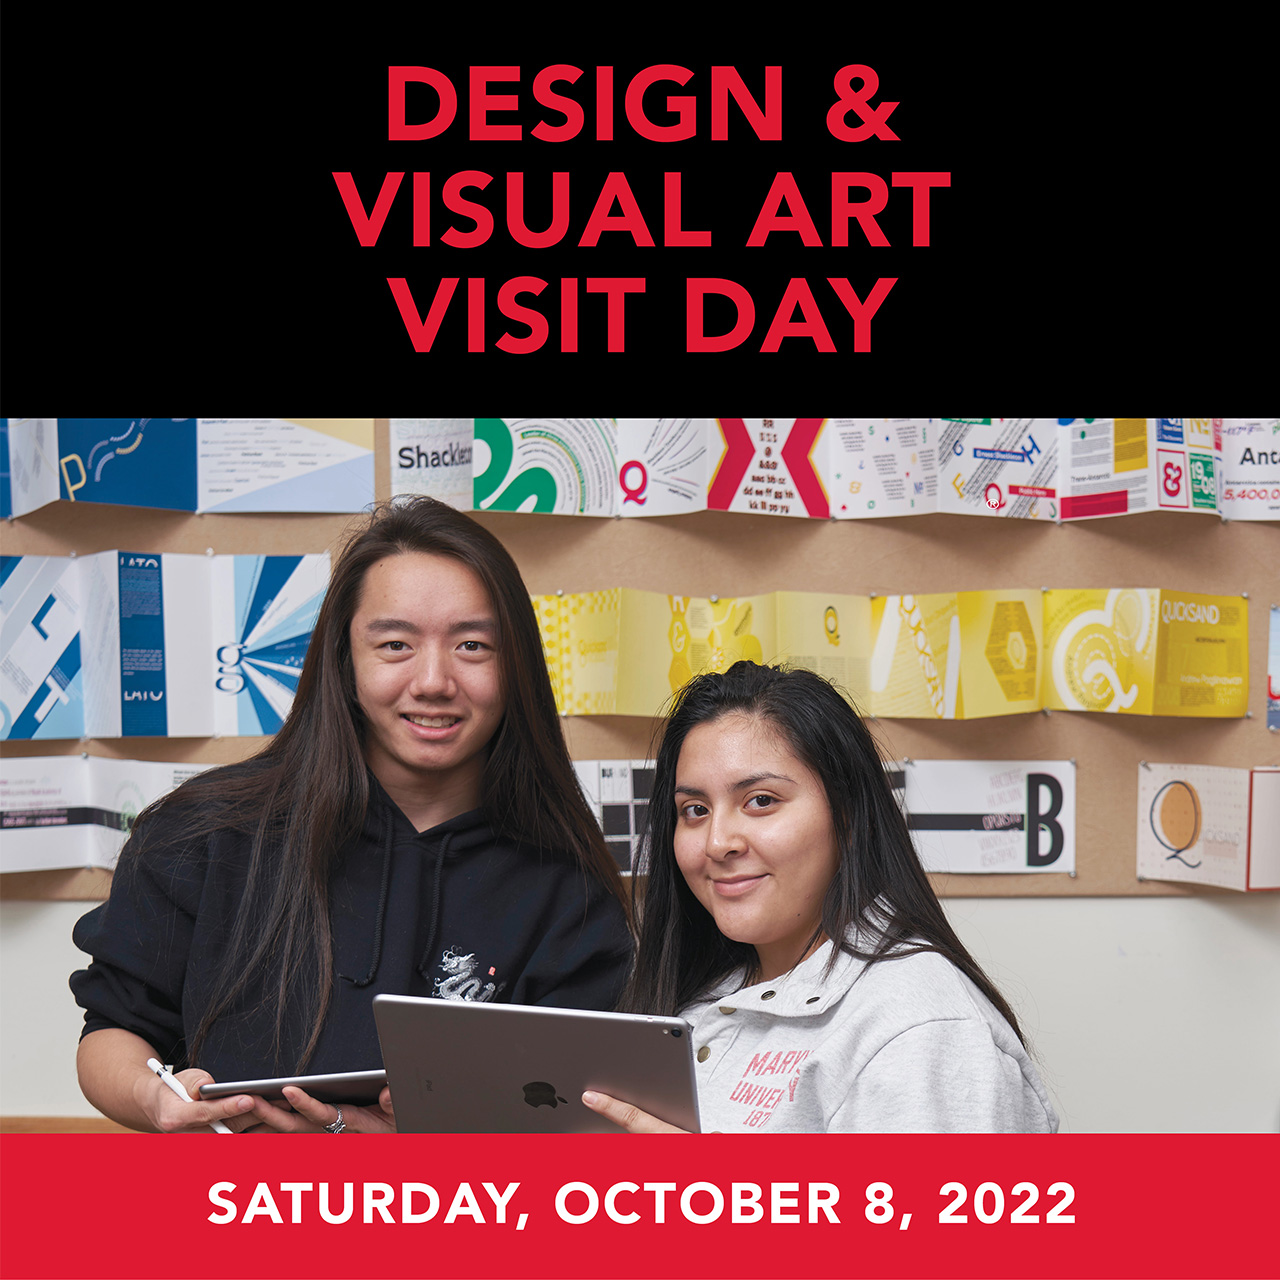 Design and Visual Art Visit Day October 8, 2022